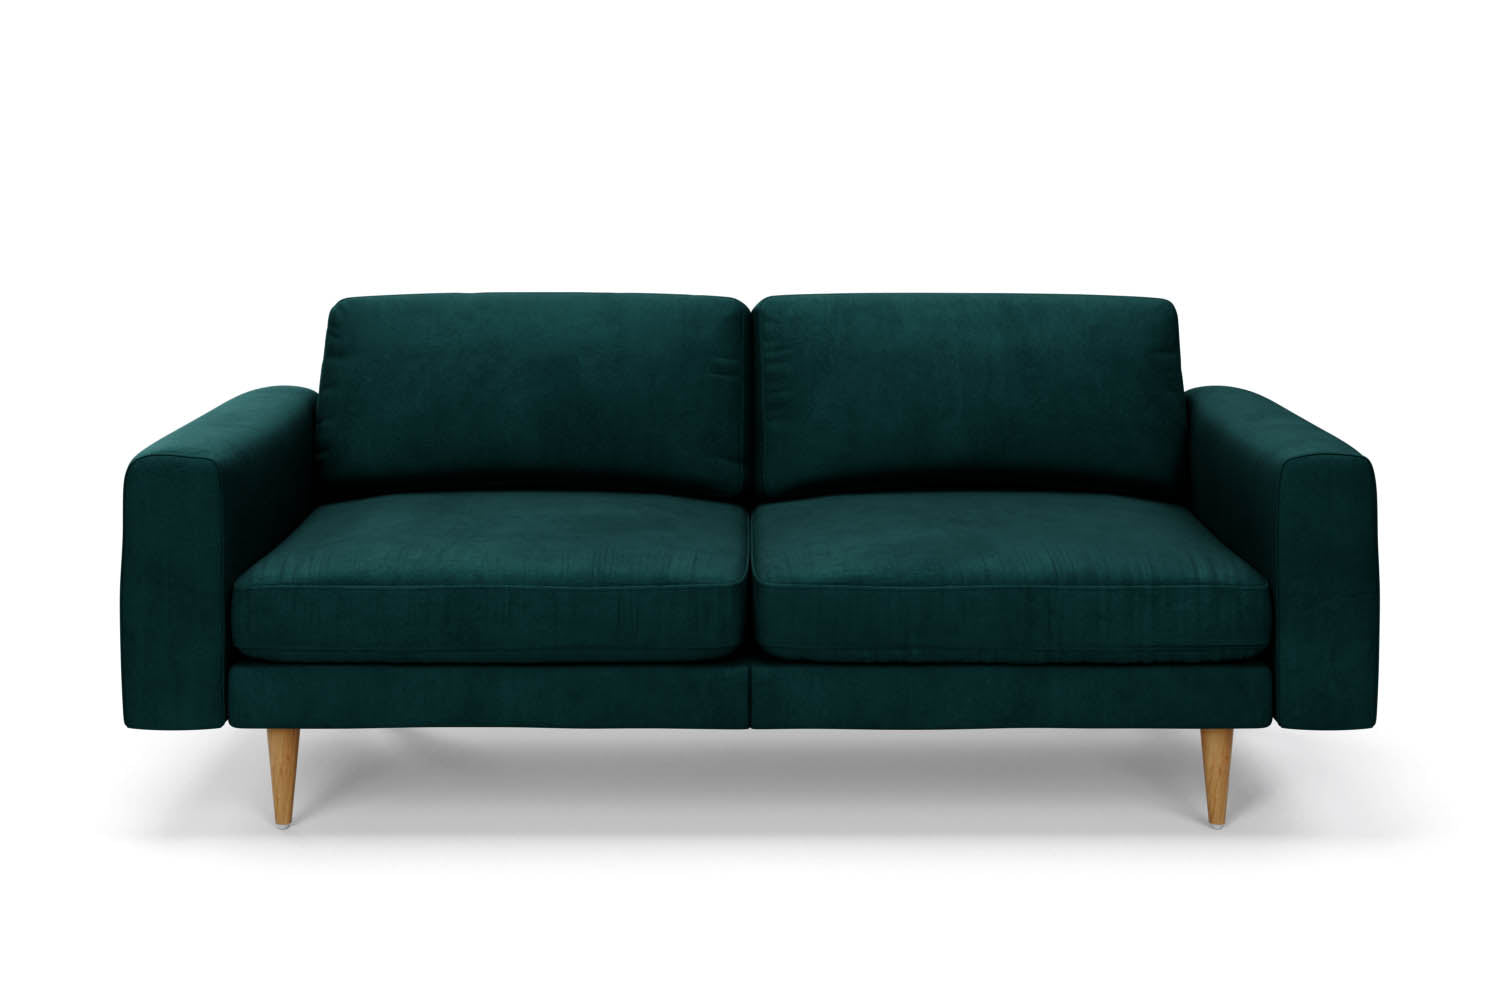 SNUG | The Big Chill 3 Seater Sofa in Pine Green variant_40837198970928